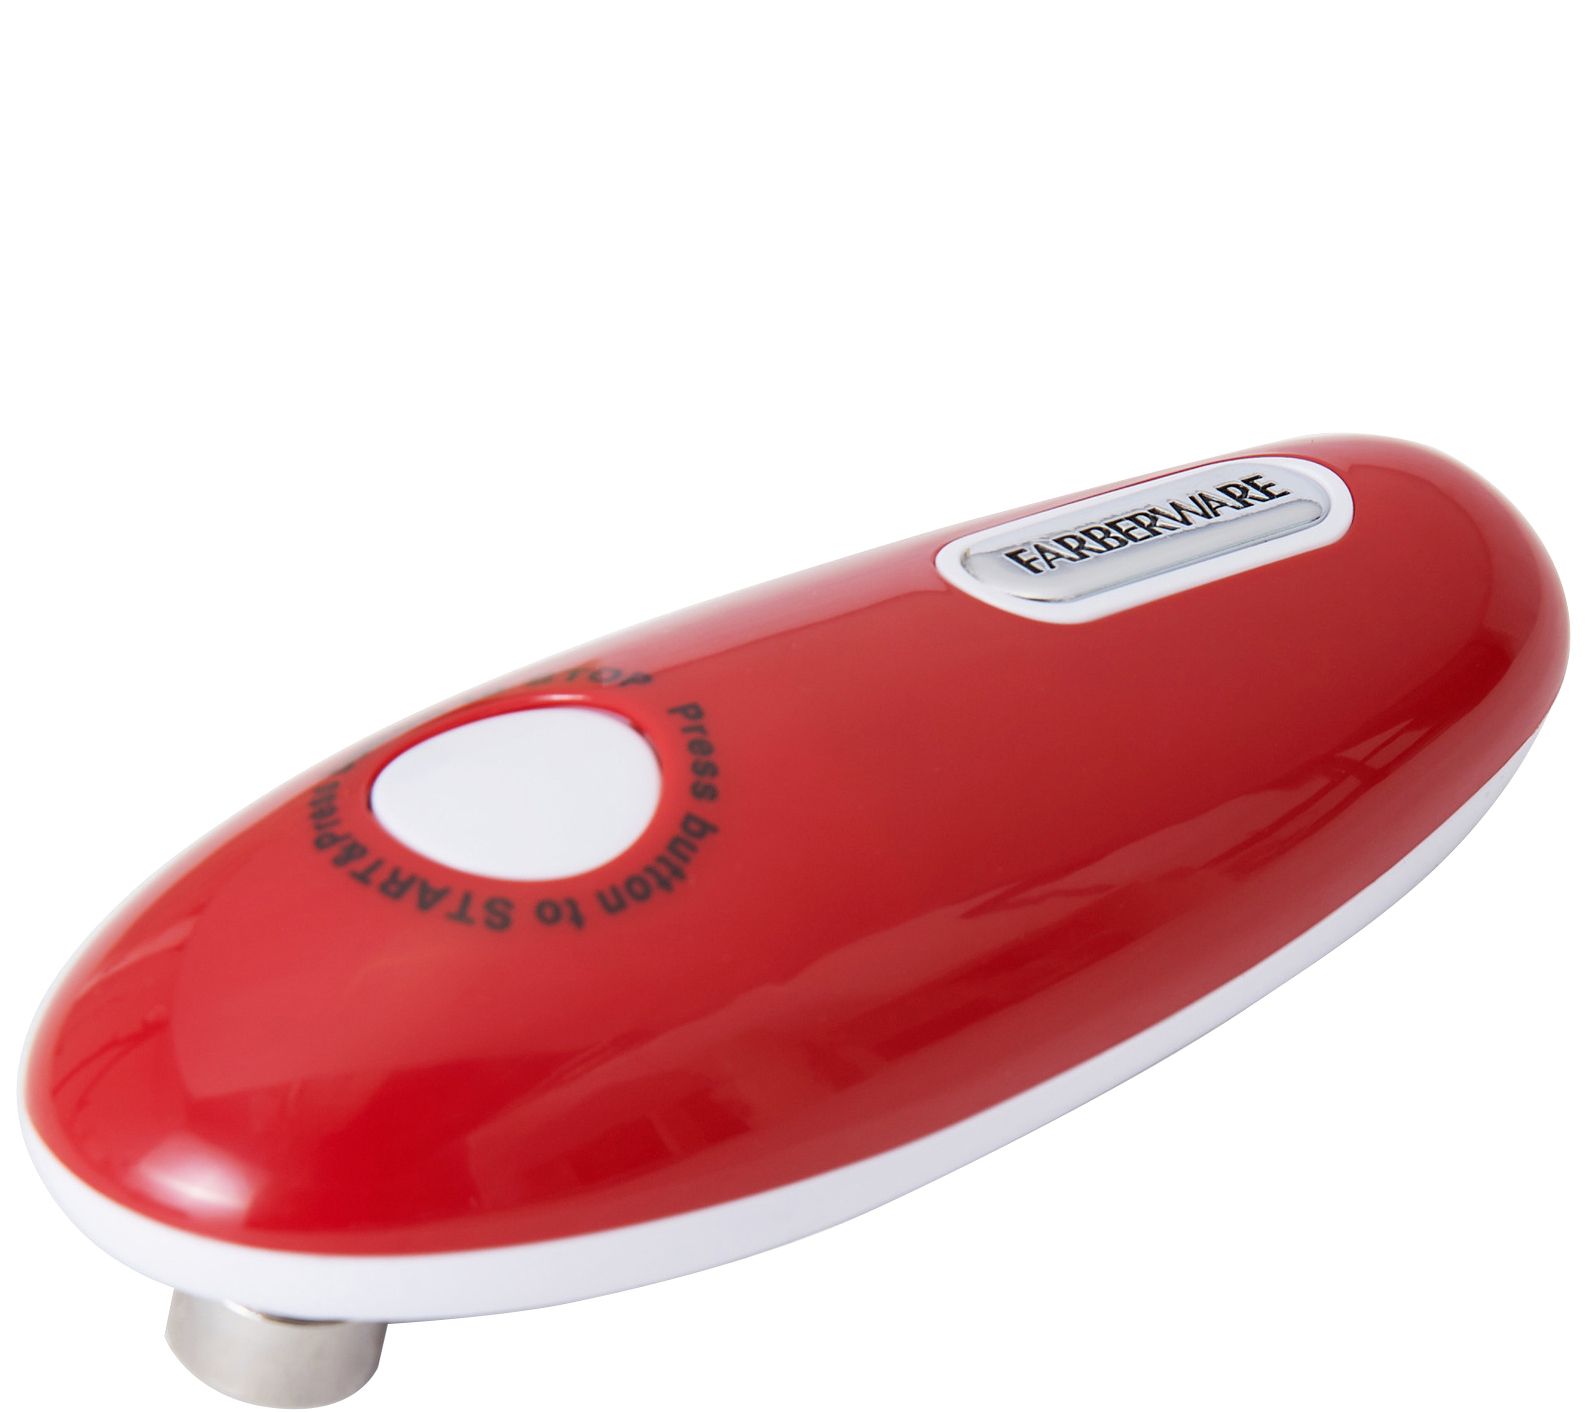 Farberware Can Opener, Hands-Free, Automatic, Professional